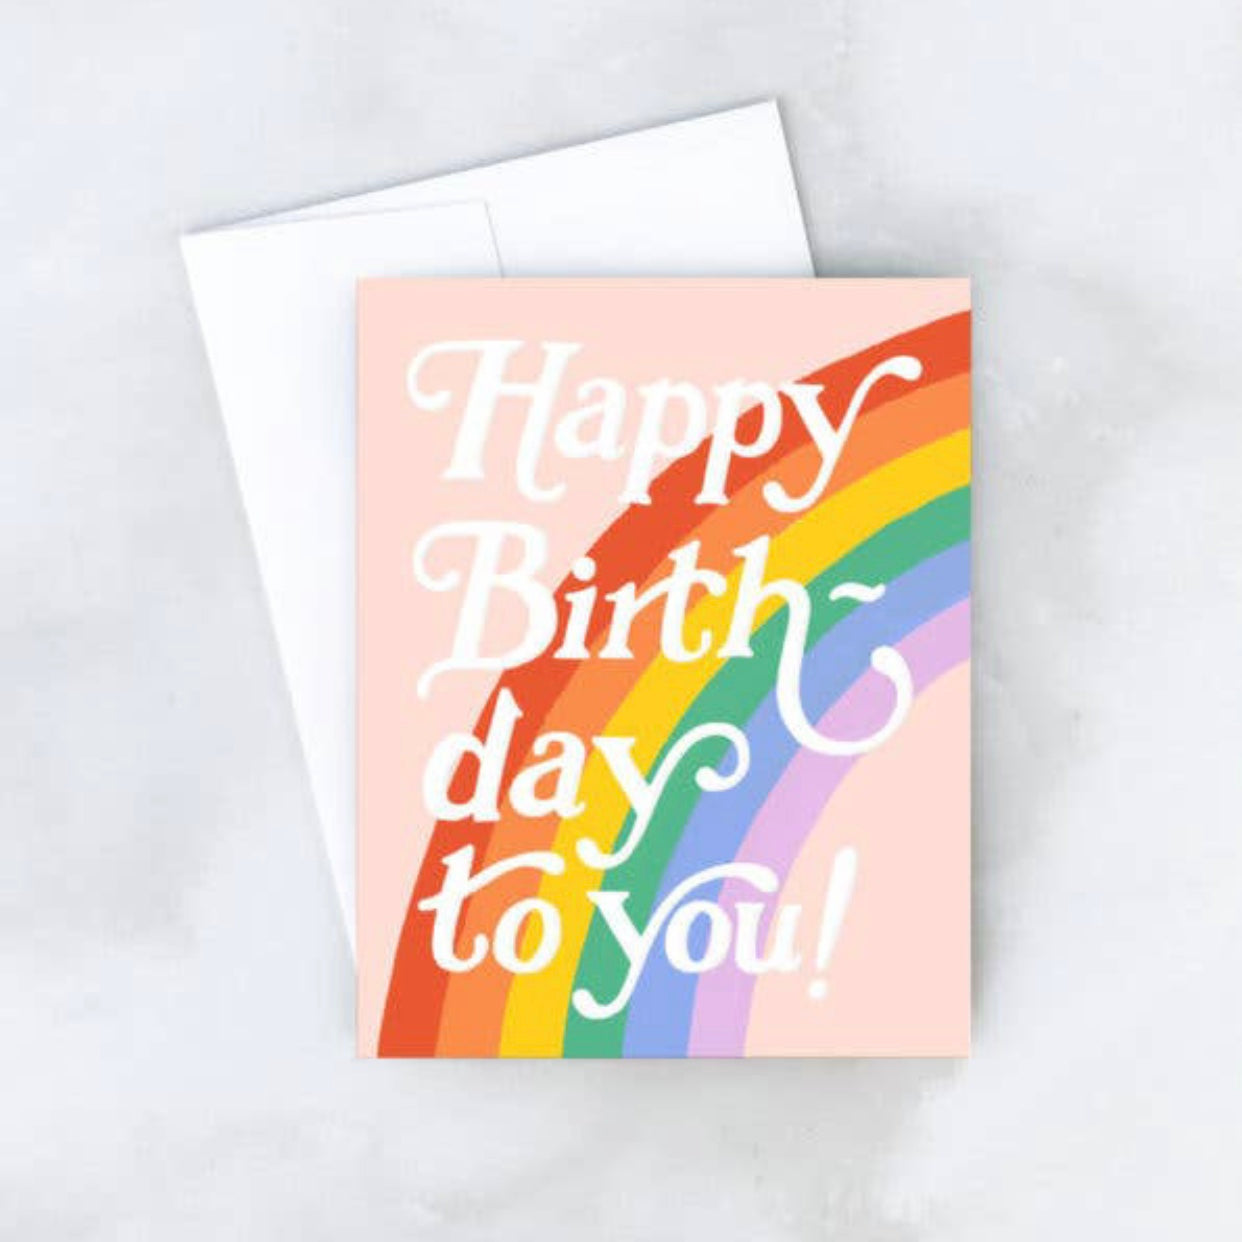 Happy birthday to you greeting card